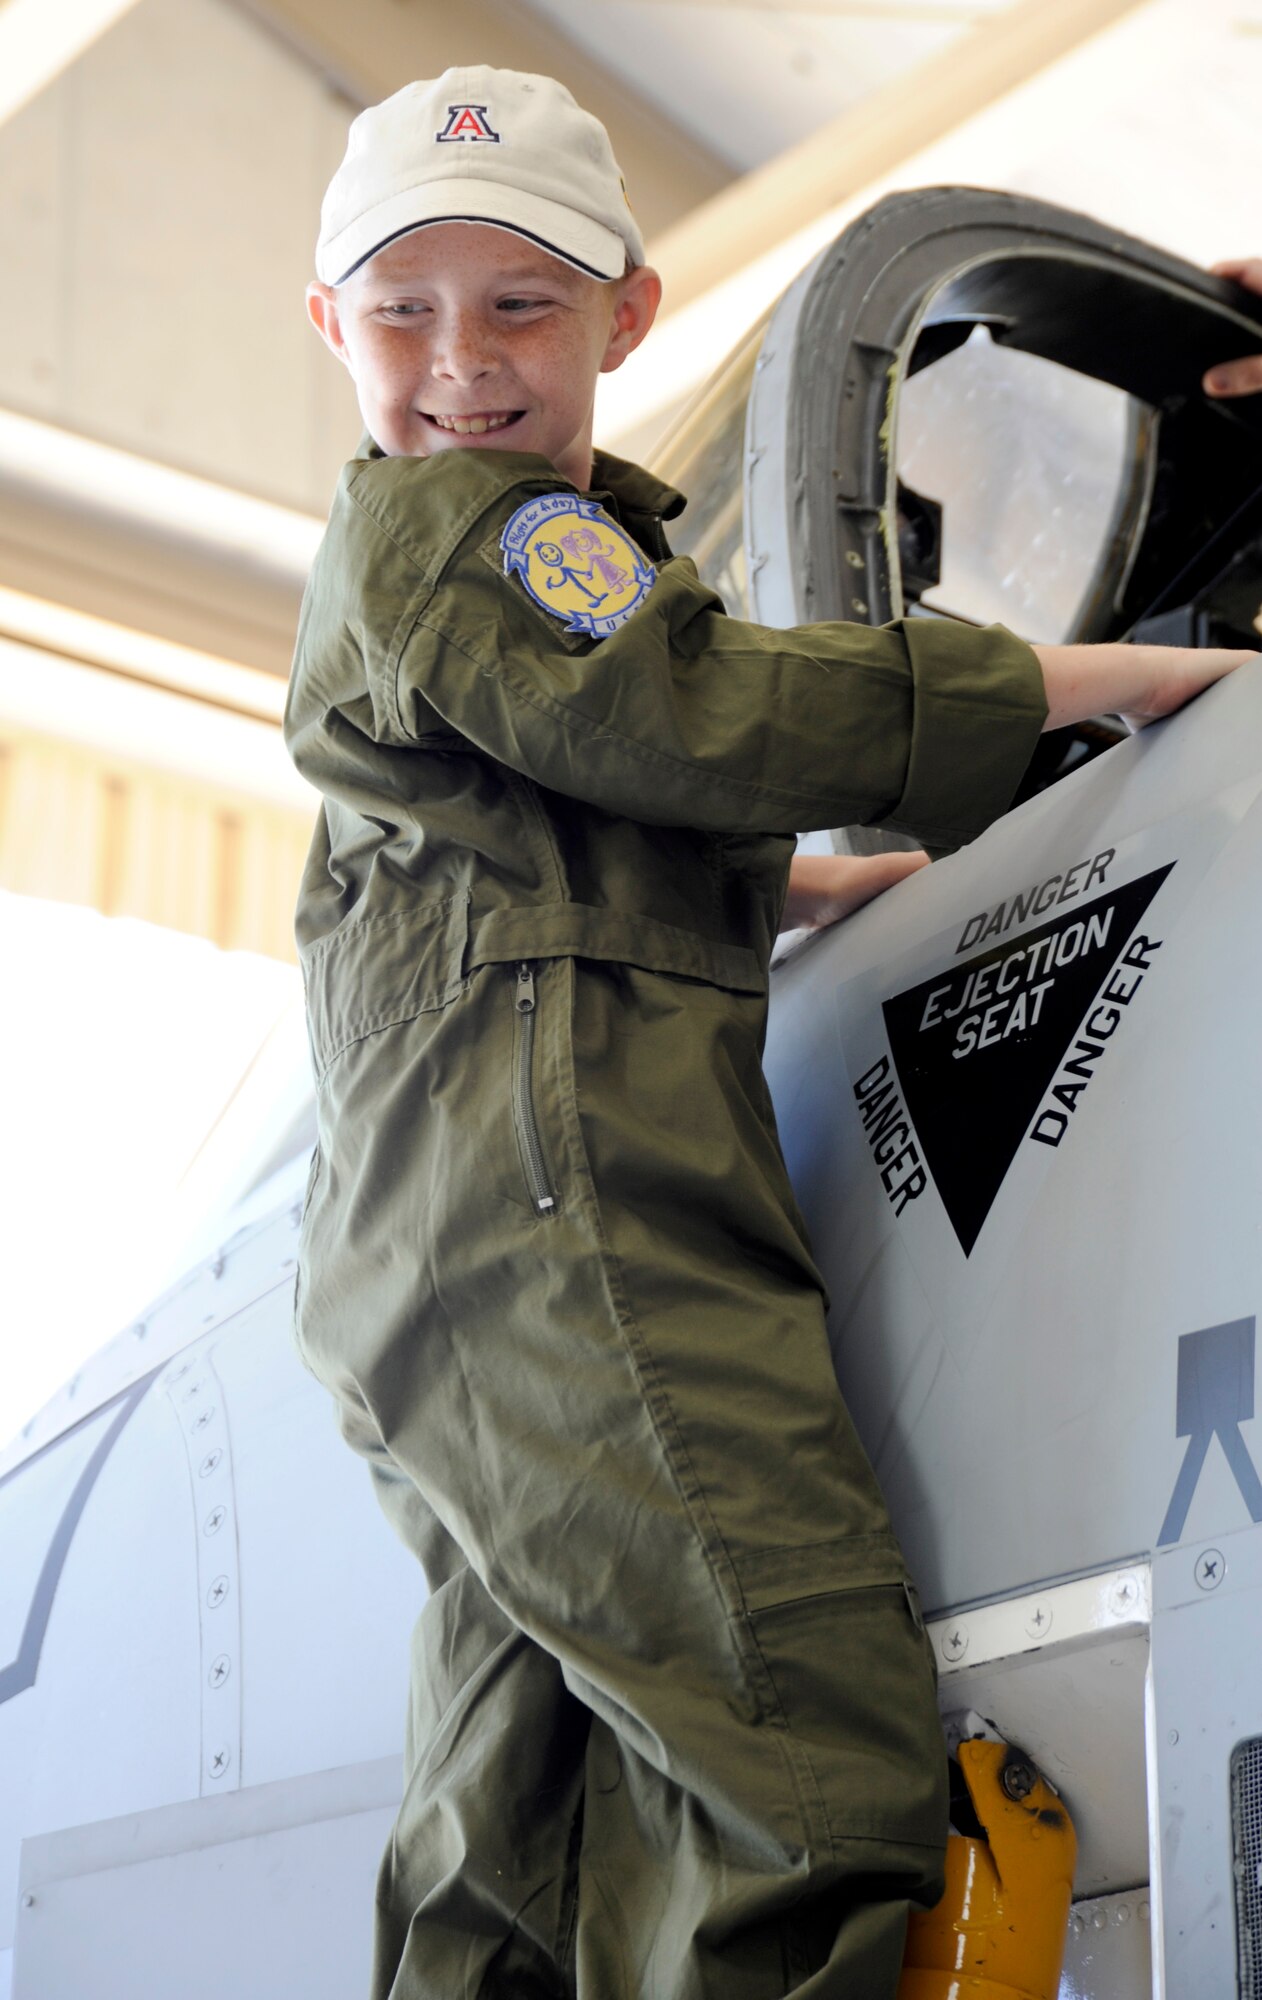 Eight-year-old Larry Ronstadt climbs into the cockpit of an A-10 Thunderbolt II static on Oct 25, 2012, during the Pilot for a Day event at Davis-Monthan Air Force Base, Ariz.  Pilot for a Day is a program which provides children with a terminal illness a day to visit the base and become an honorary pilot for one of the operational squadrons.  (U.S. Air Force photo by 1LT Susan Harrington/released)